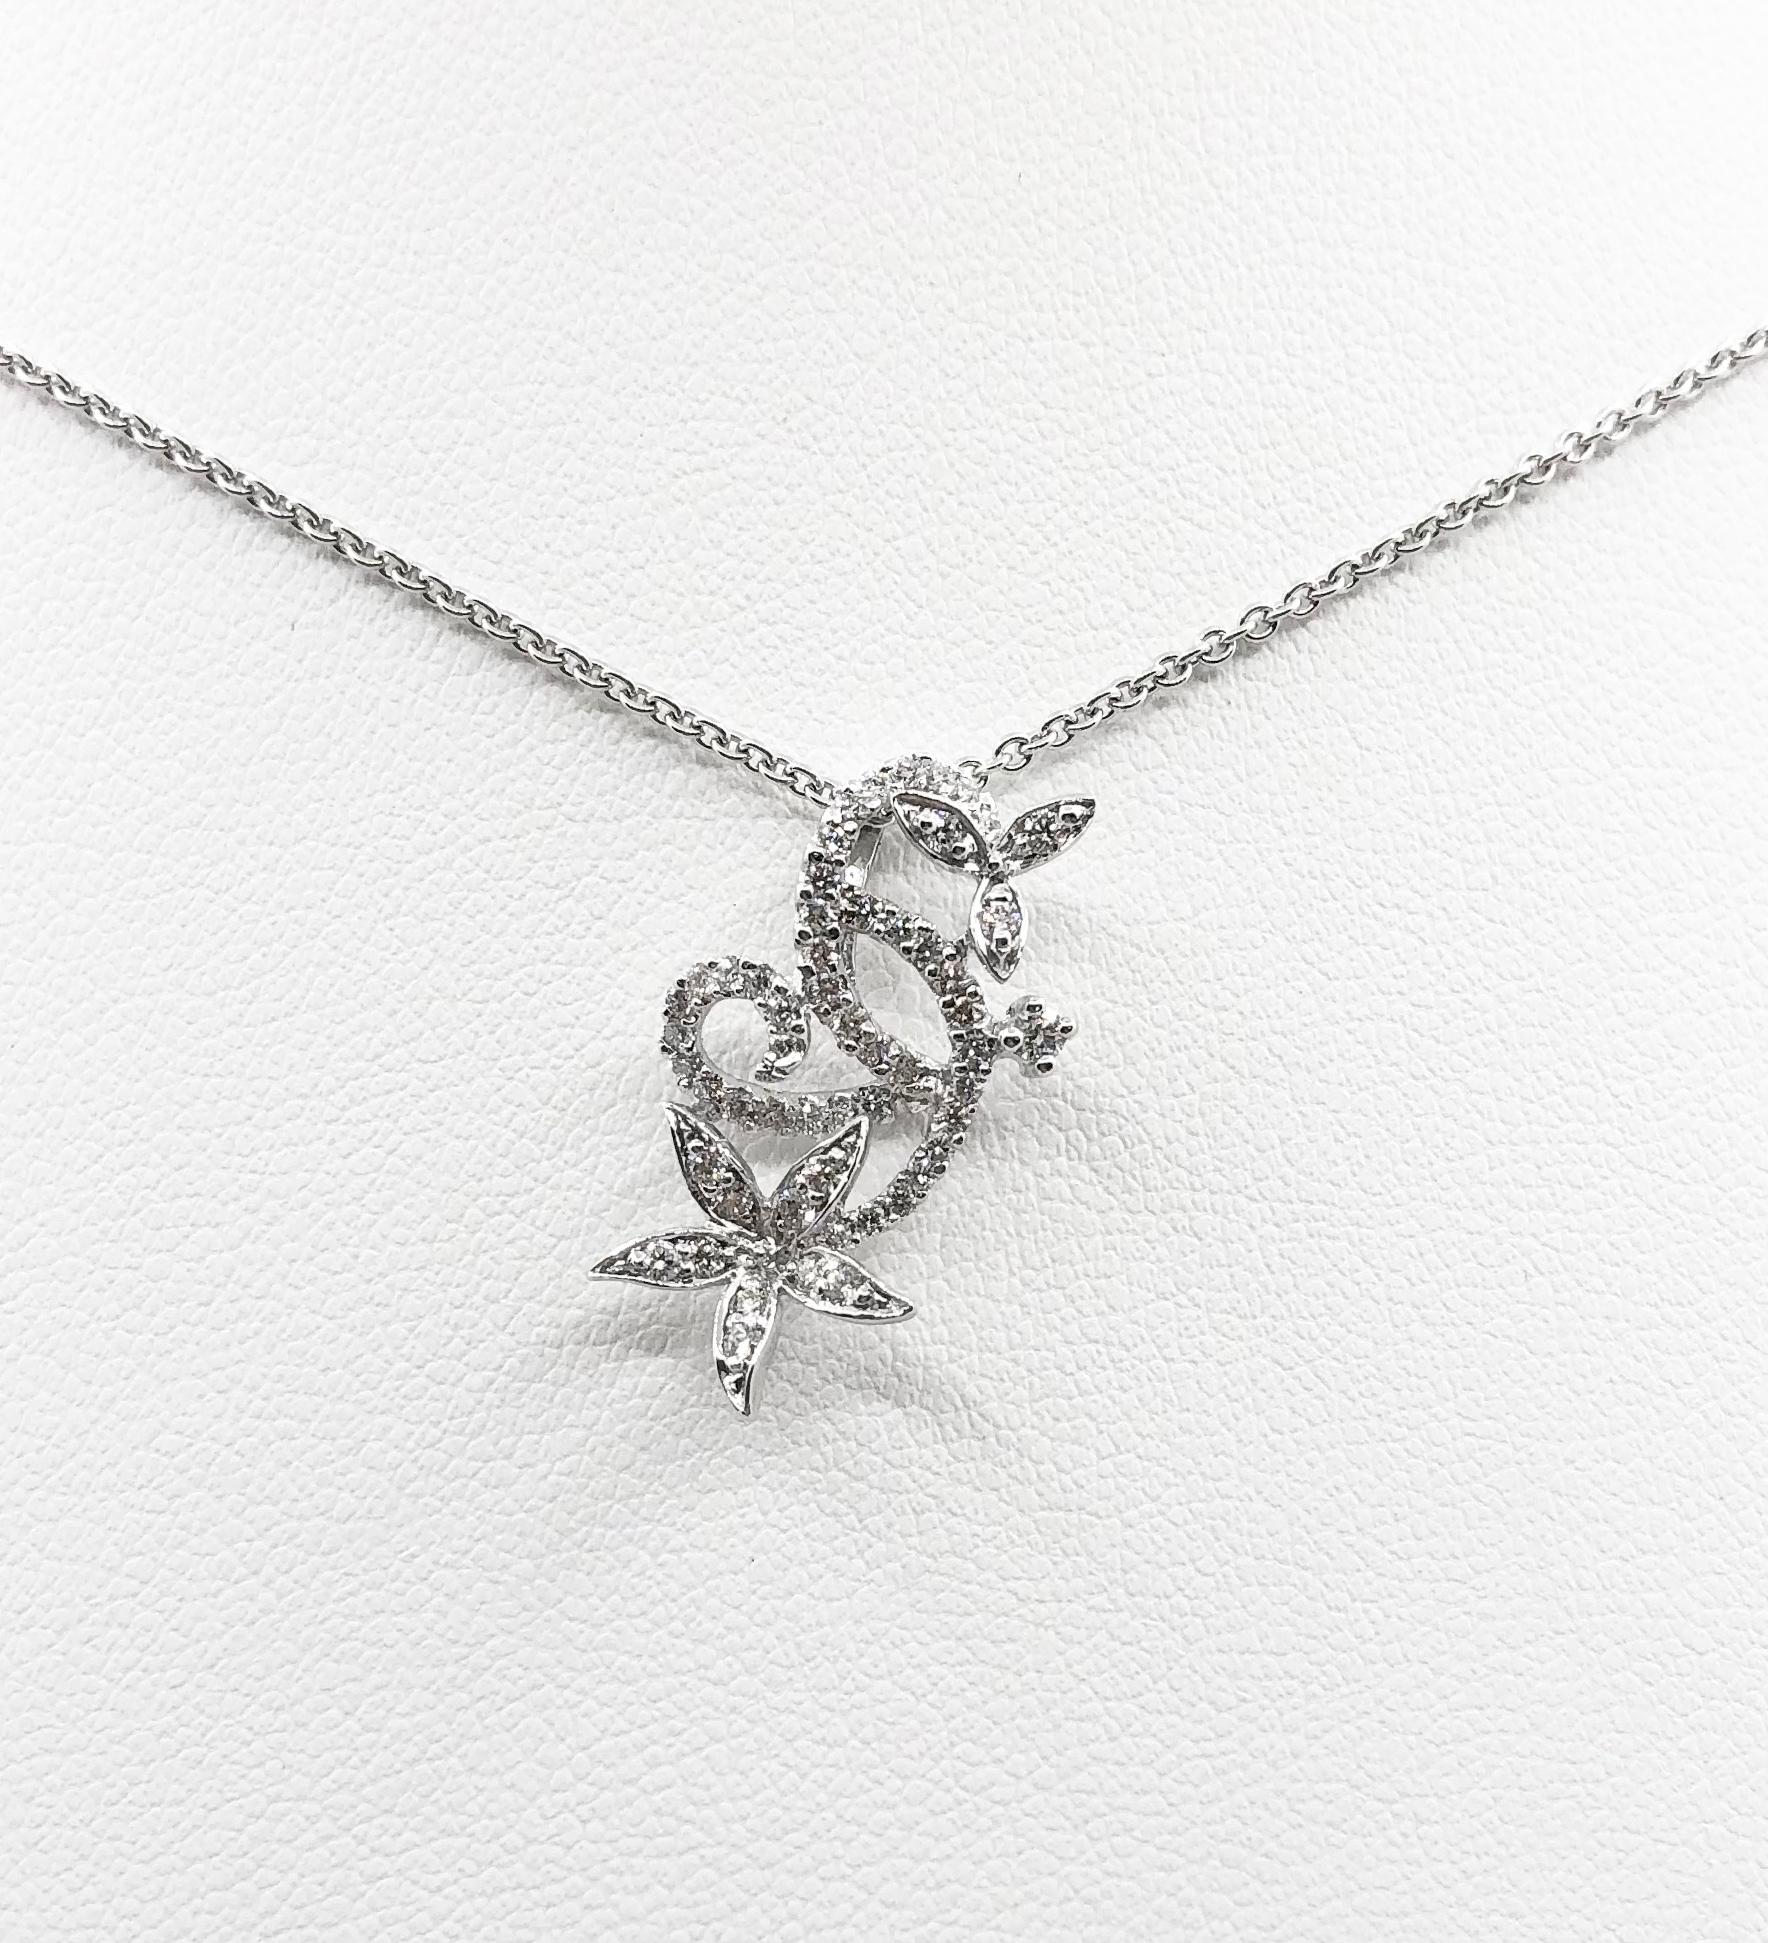 Diamond 0.35 carat Pendant set in 18 Karat White Gold Settings
(chain not included)

Width: 1.3 cm 
Length: 2.3 cm
Total Weight: 1.8 grams

